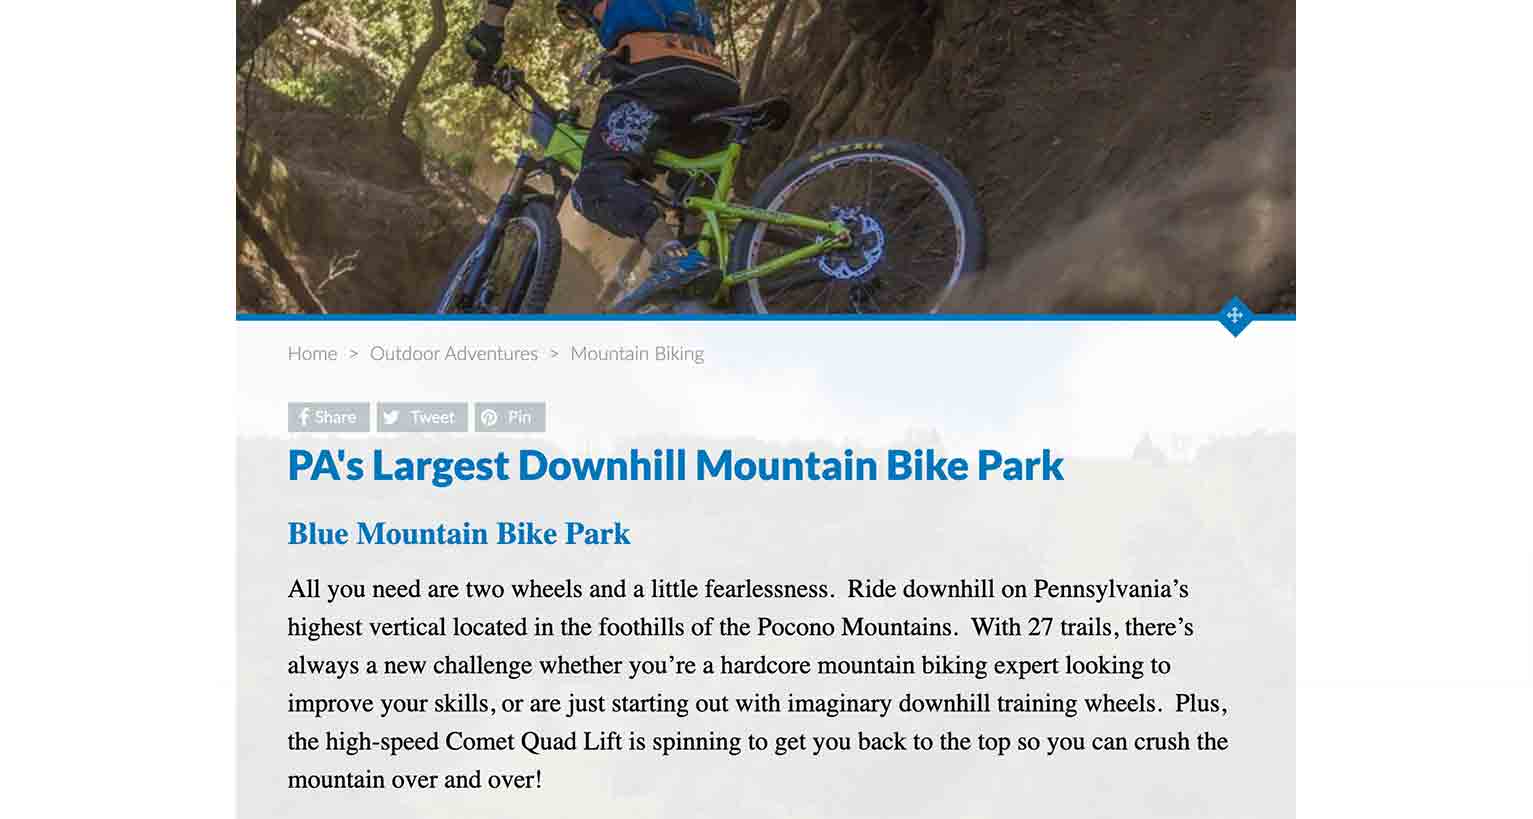 Image of bicyclist riding through rough terrain above copy advertising Pennsylvania’s largest downhill mountain bike park, Blue Mountain.